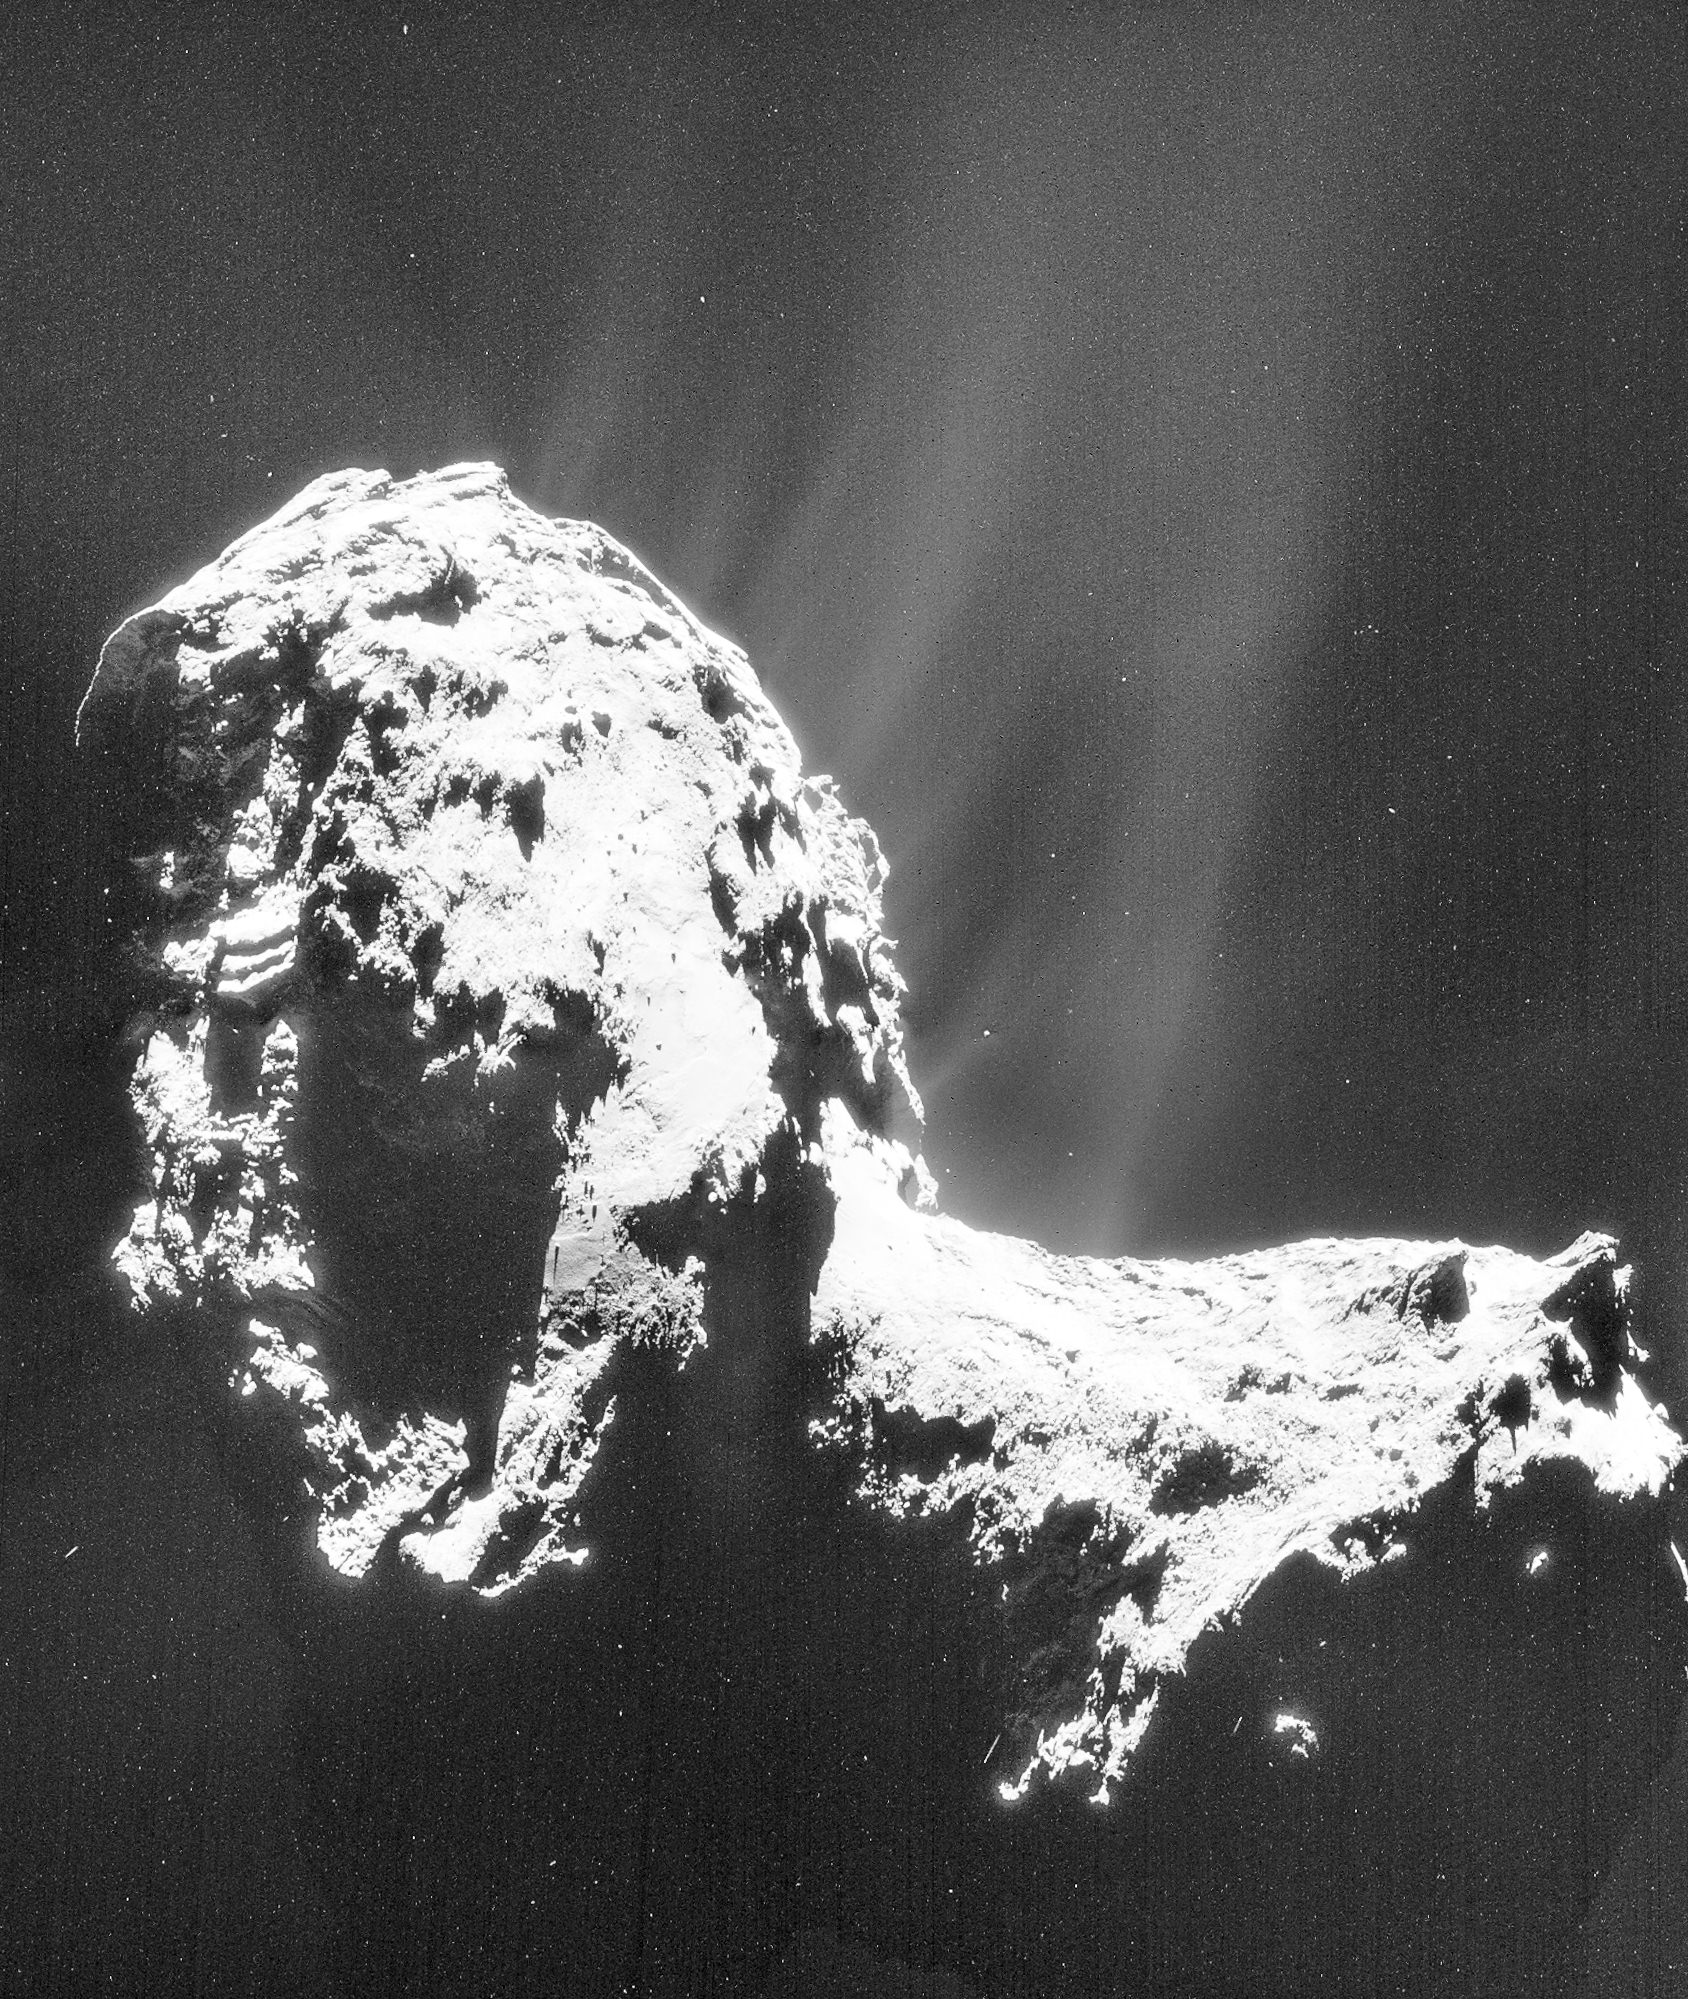 Jet Rosetta S Comet Is Feeling The Heat As Gas And Dust Erupts From